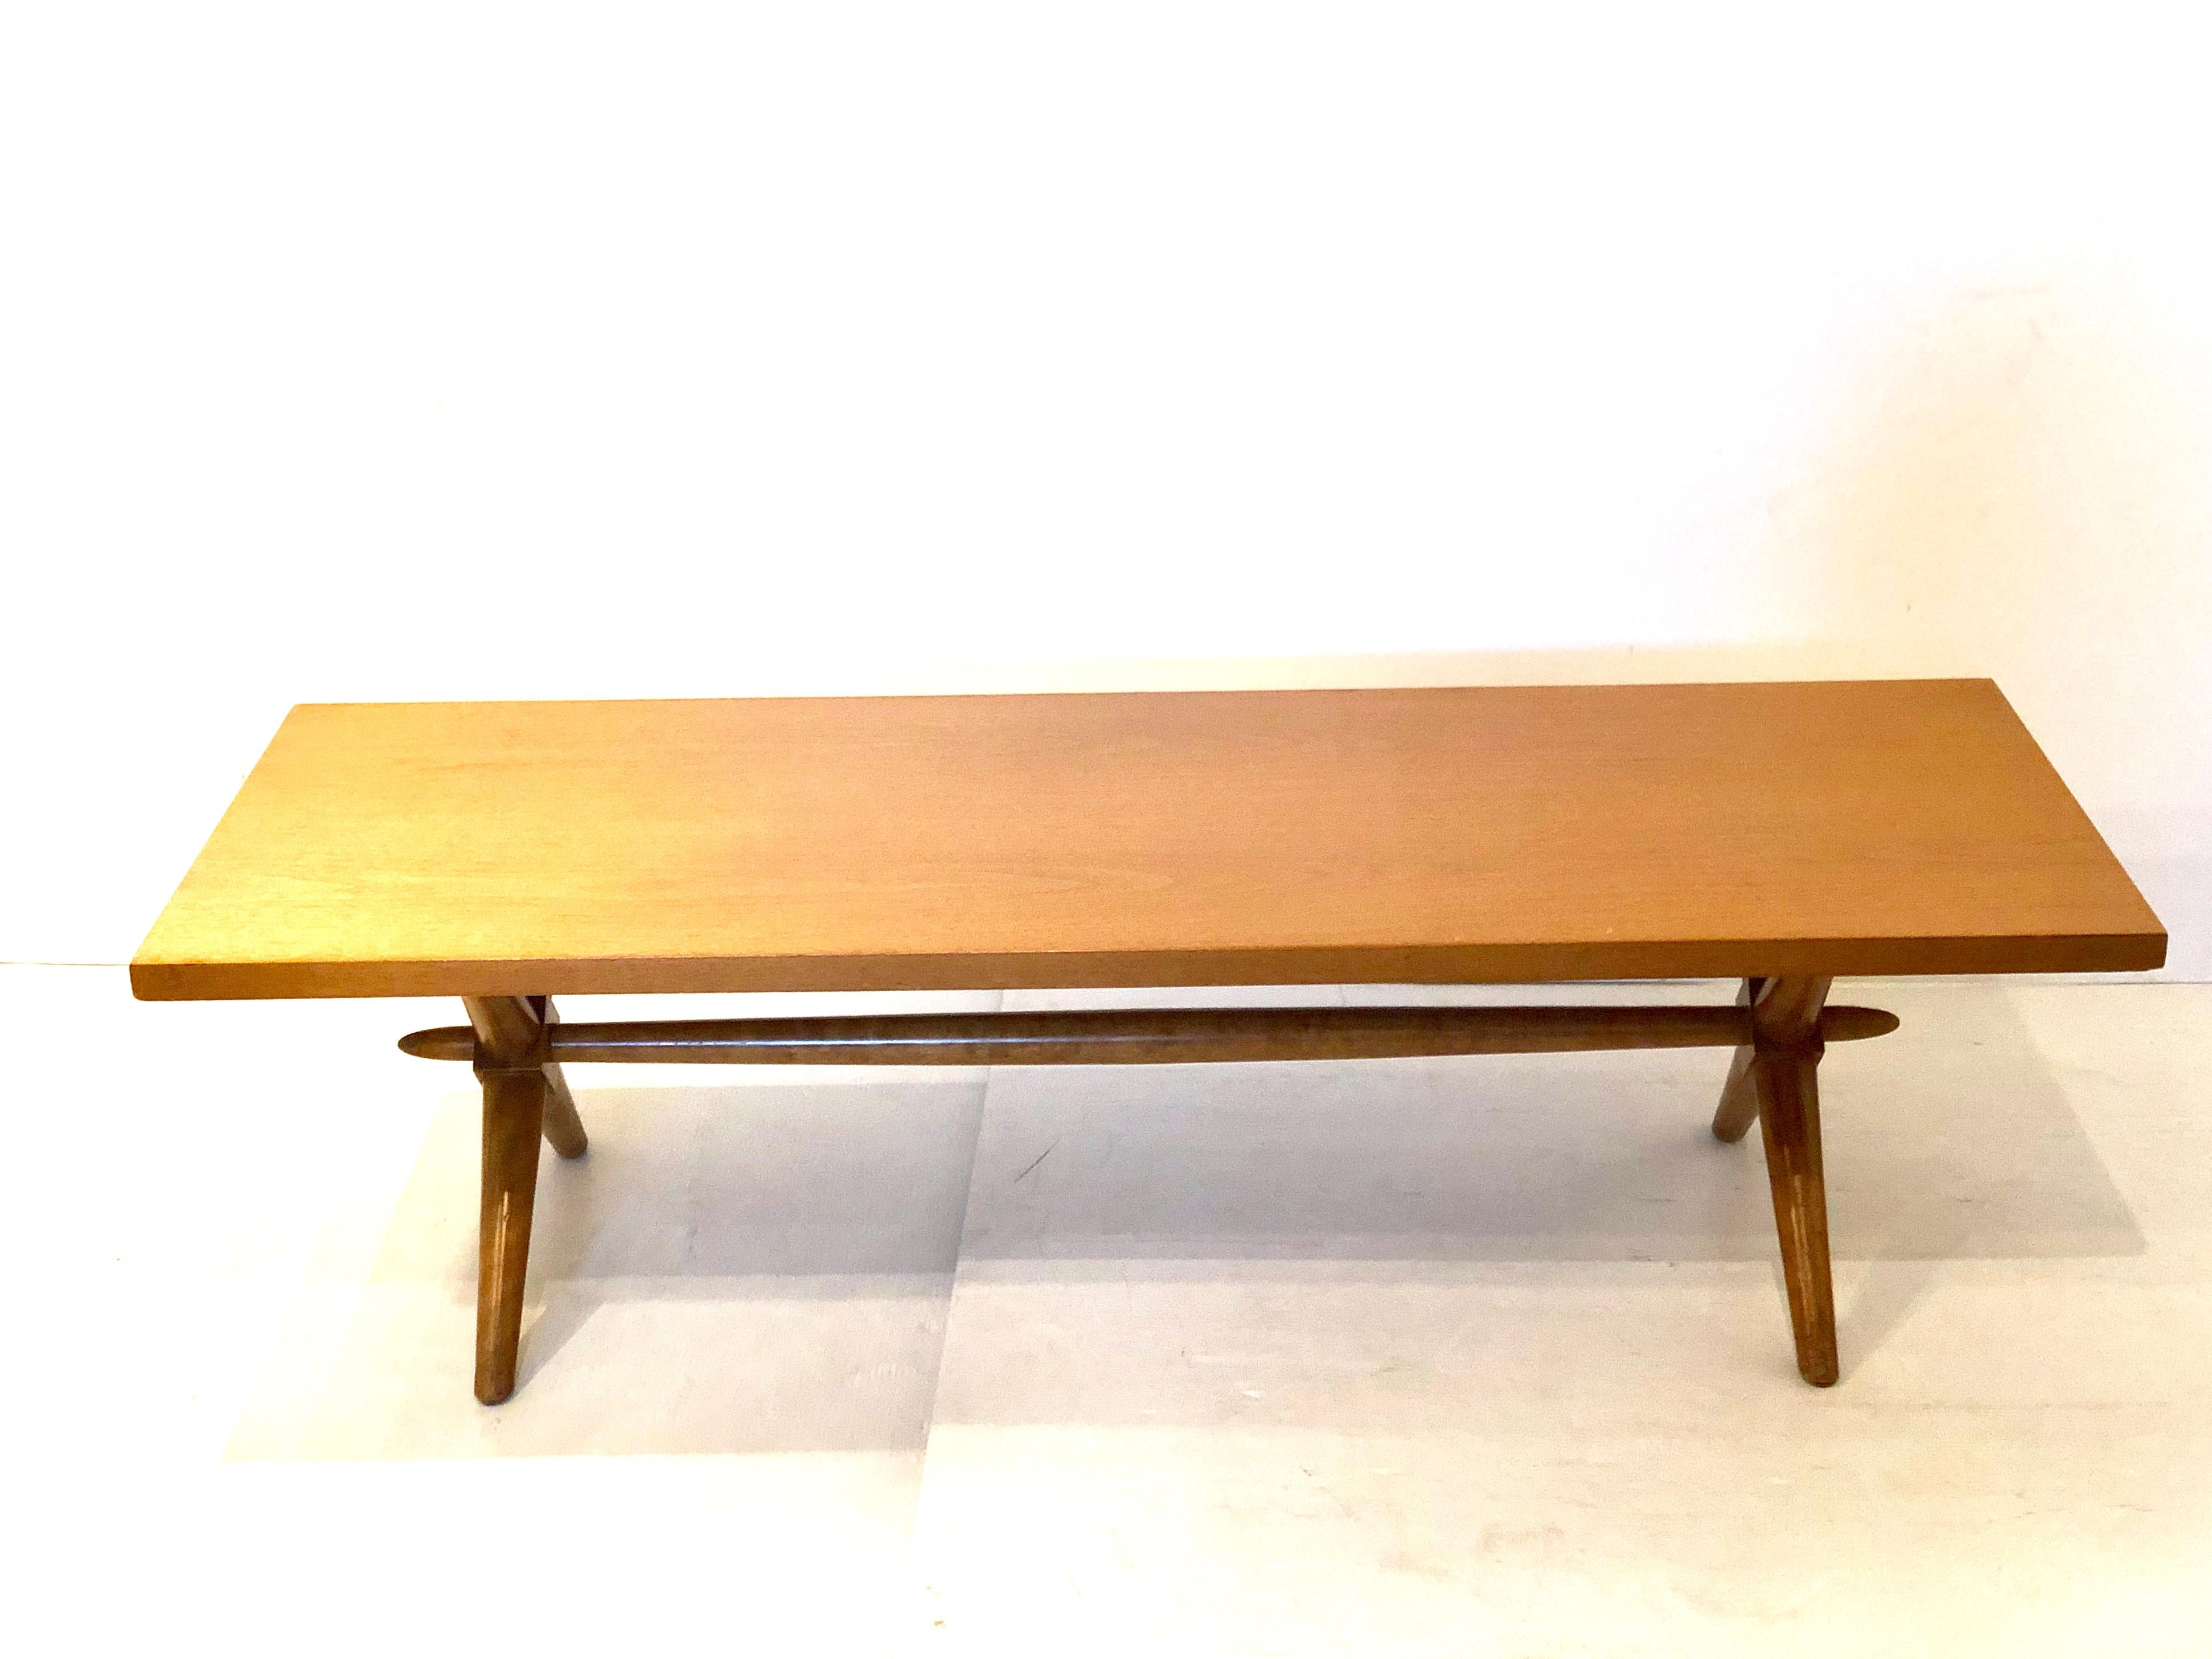 Classic Coffee Table by T.H. Robsjohn-Gibbings for Widdicomb, original finish sold in as/is condition this table can be upholstered in to a bench or refinished and lacquer, or leave it in the original condition its very clean , the table had a